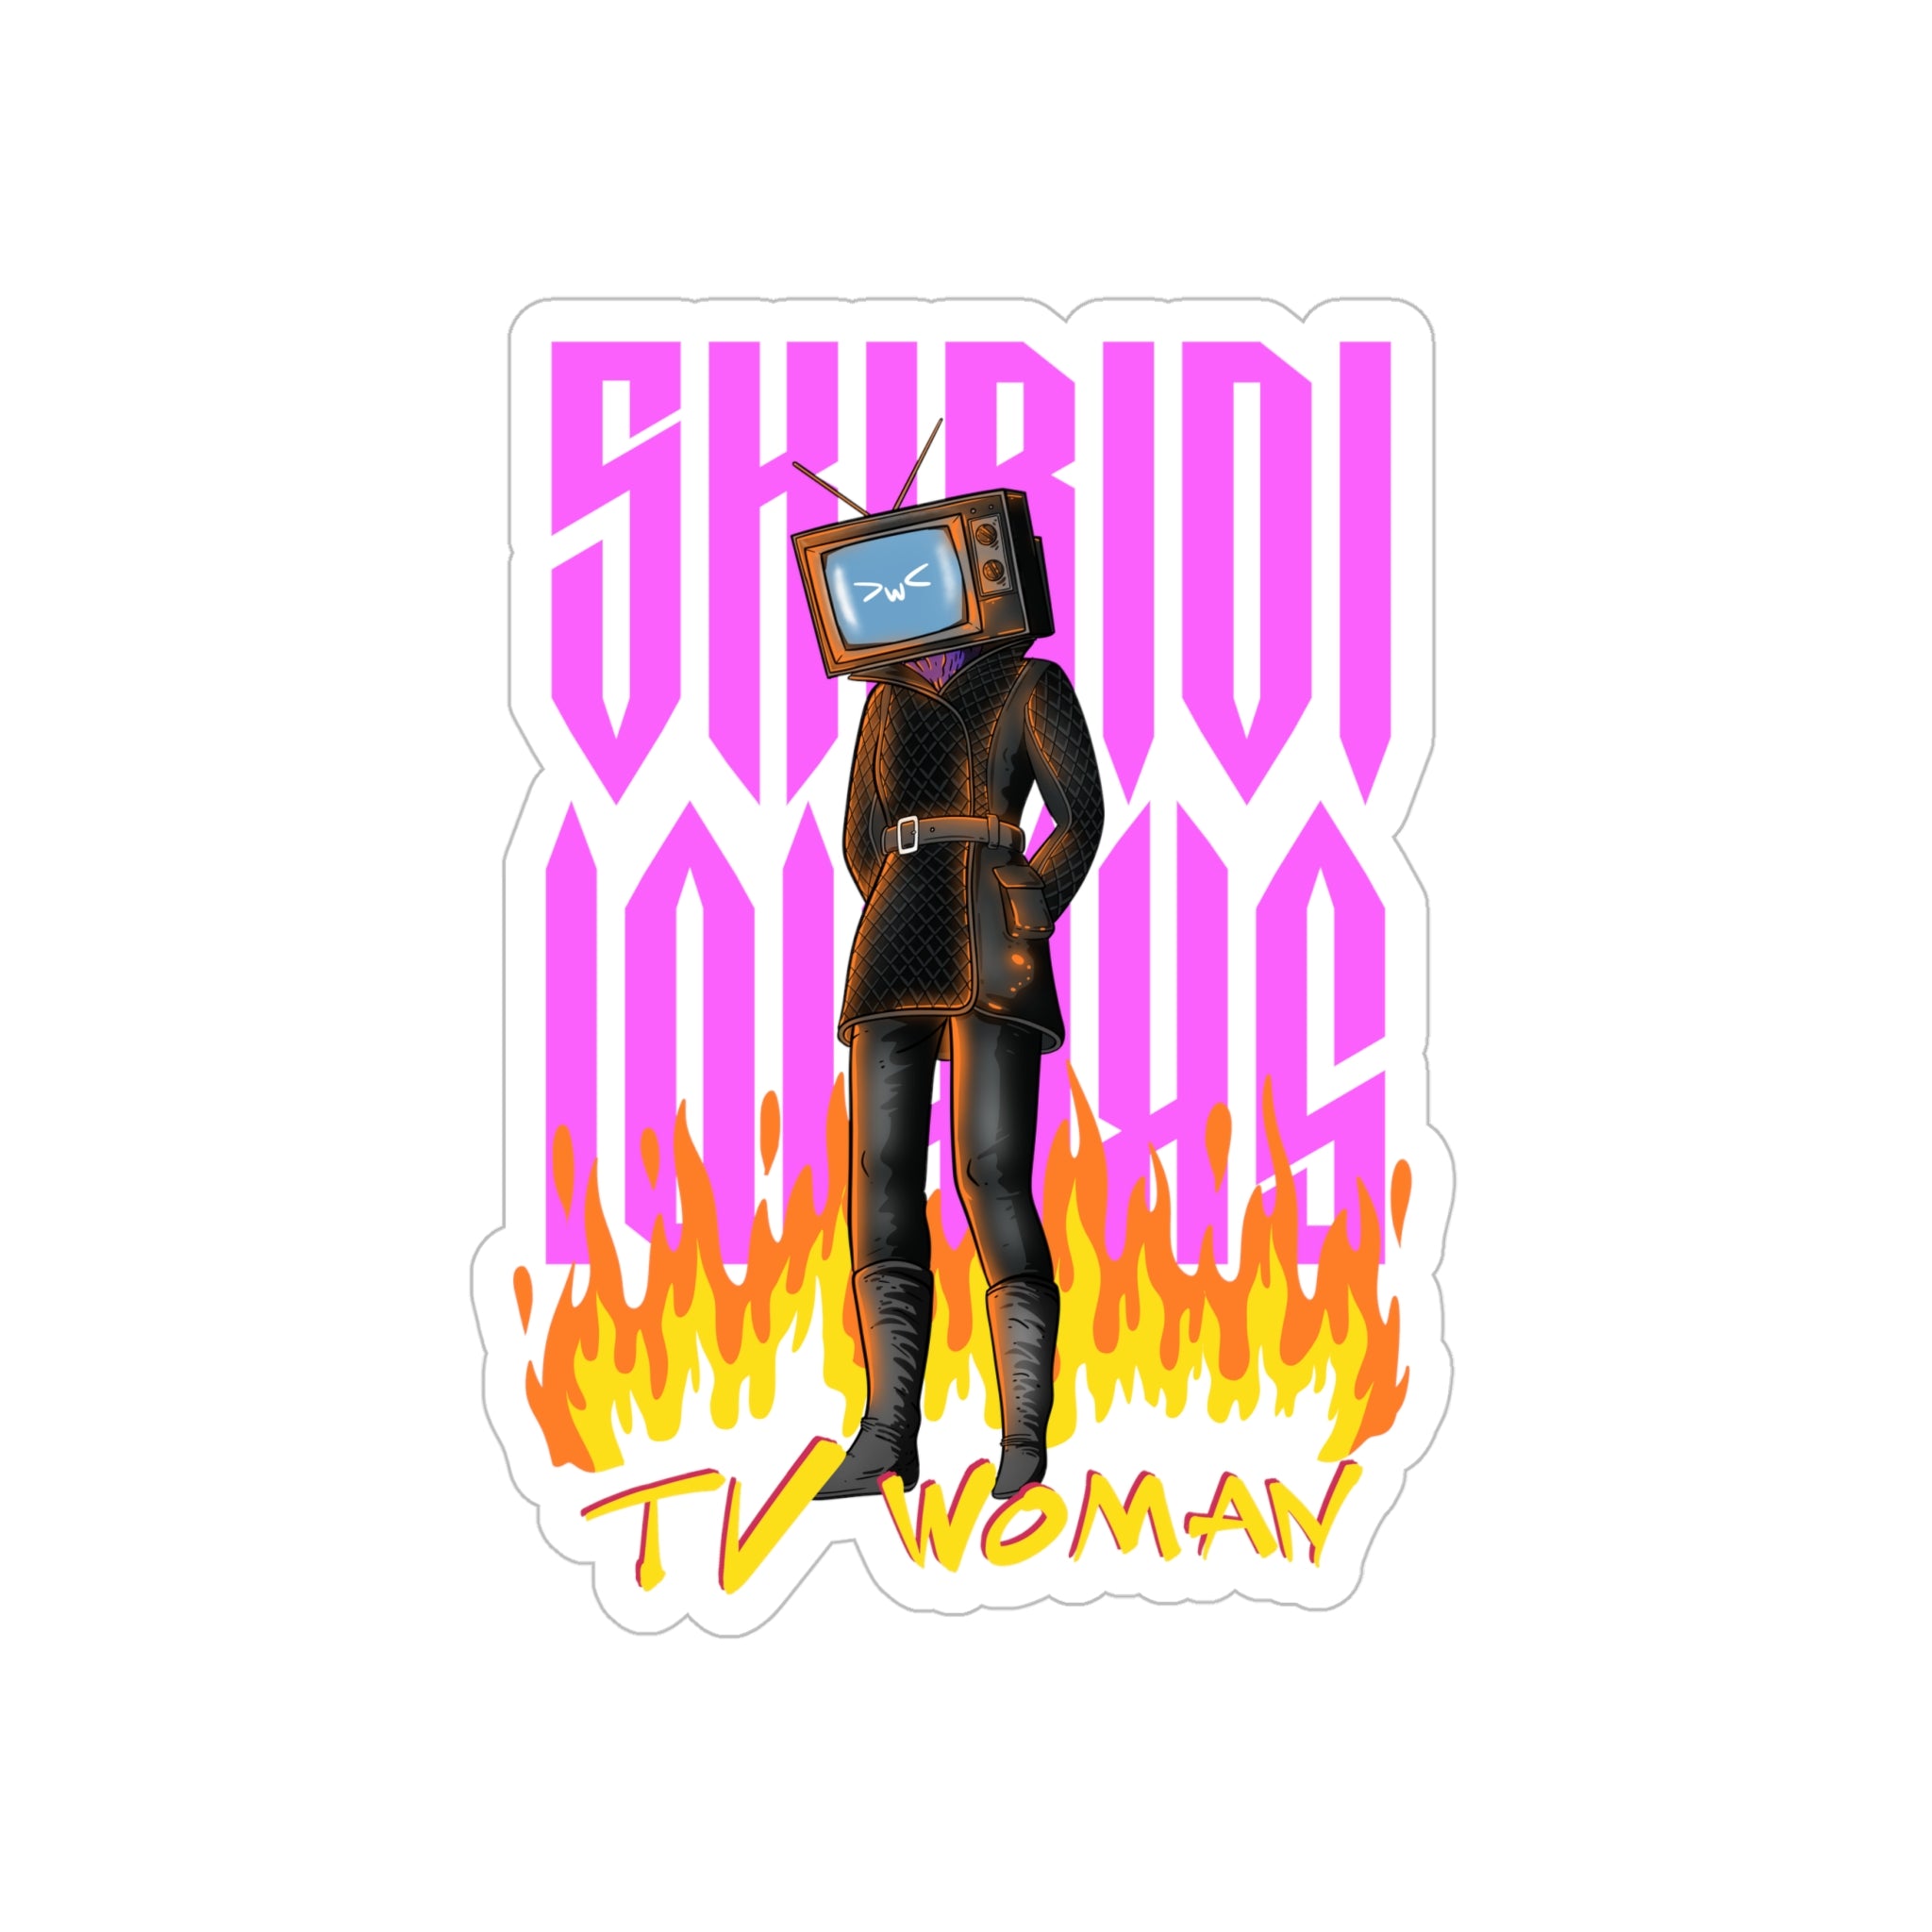 Transparent sticker with TV Woman design amidst flames and logo text